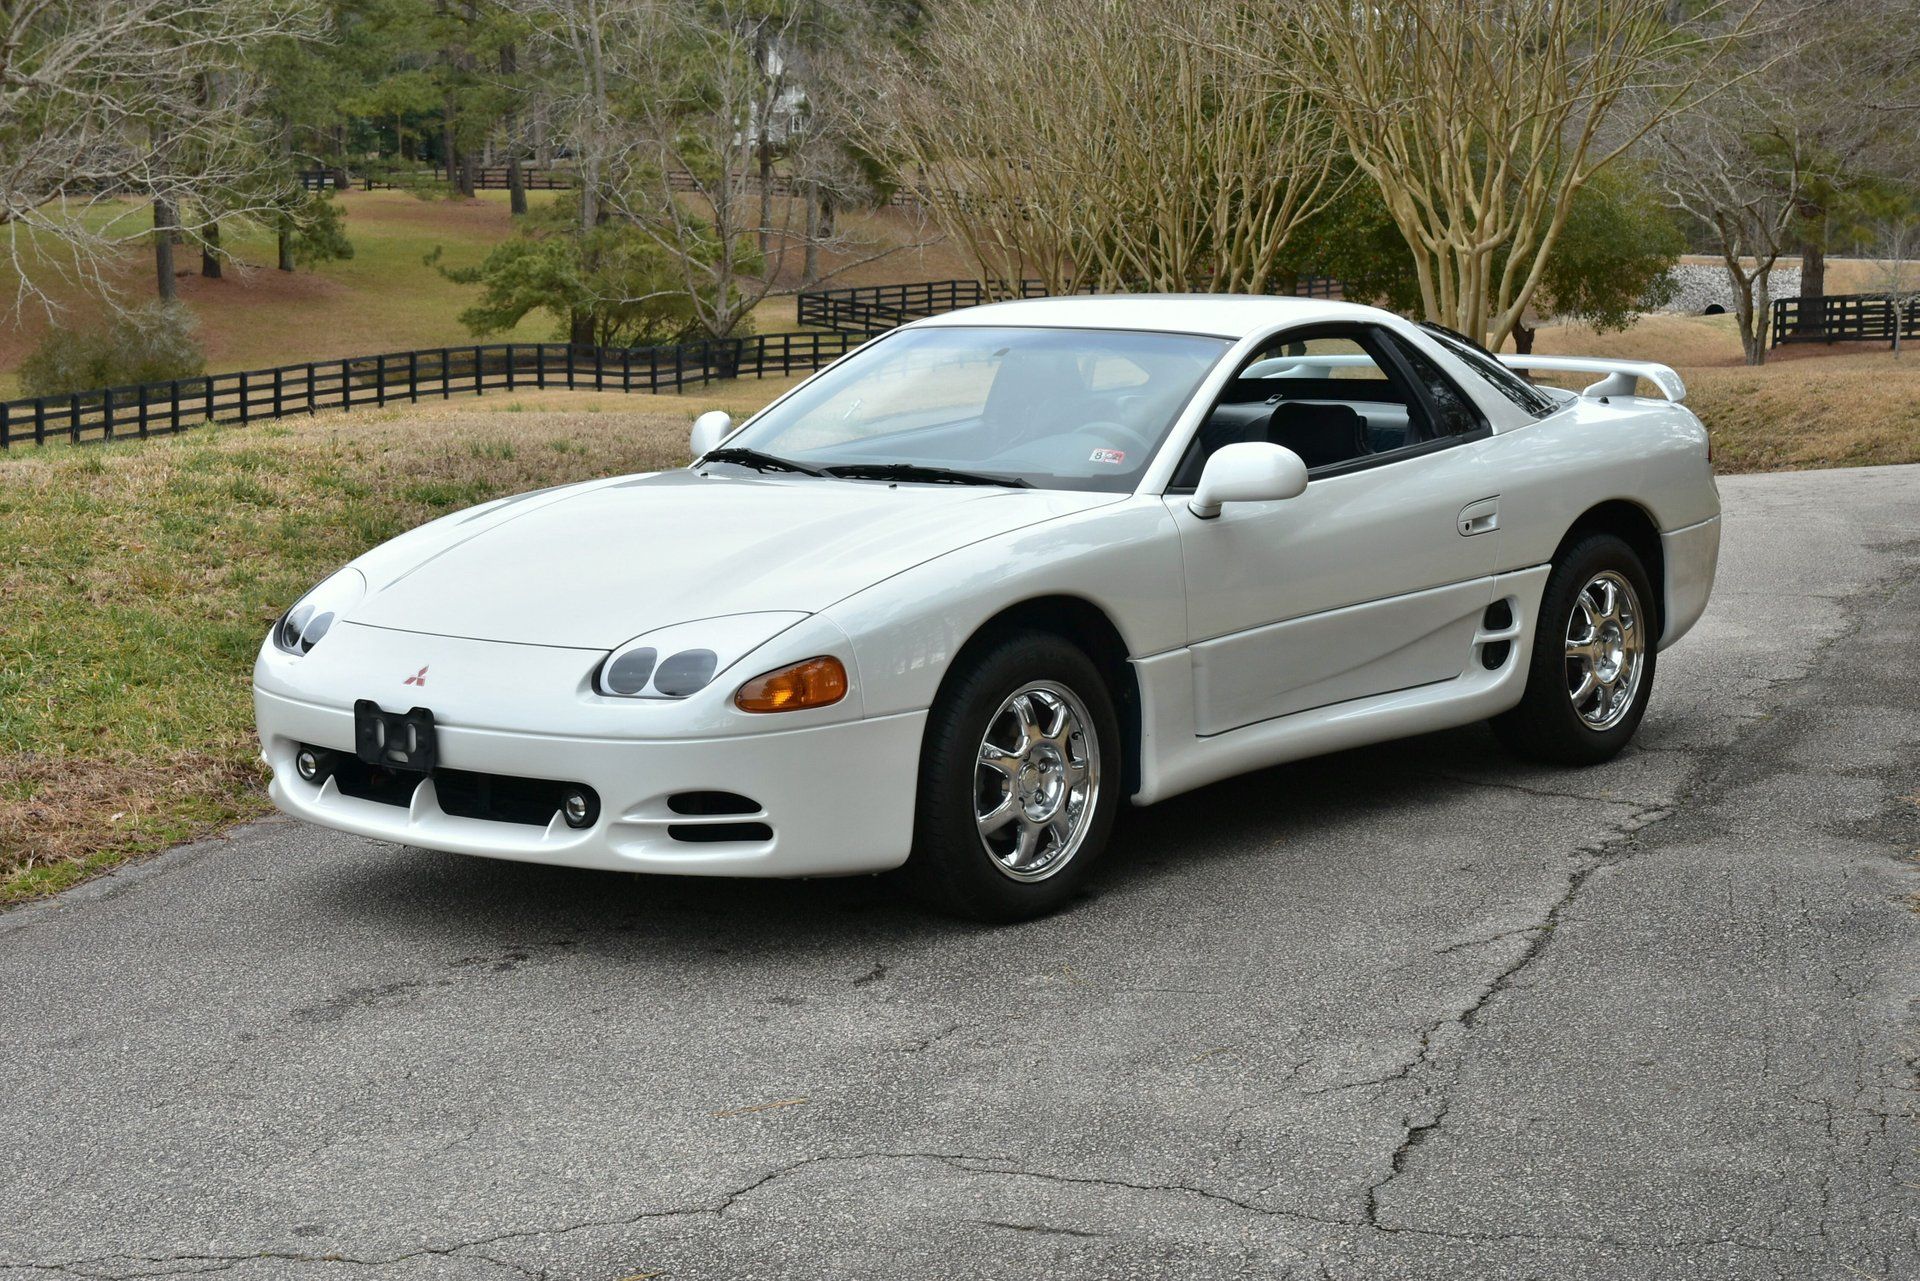 1995 Mitsubishi 3000 GT Is A Perfect Sports Import